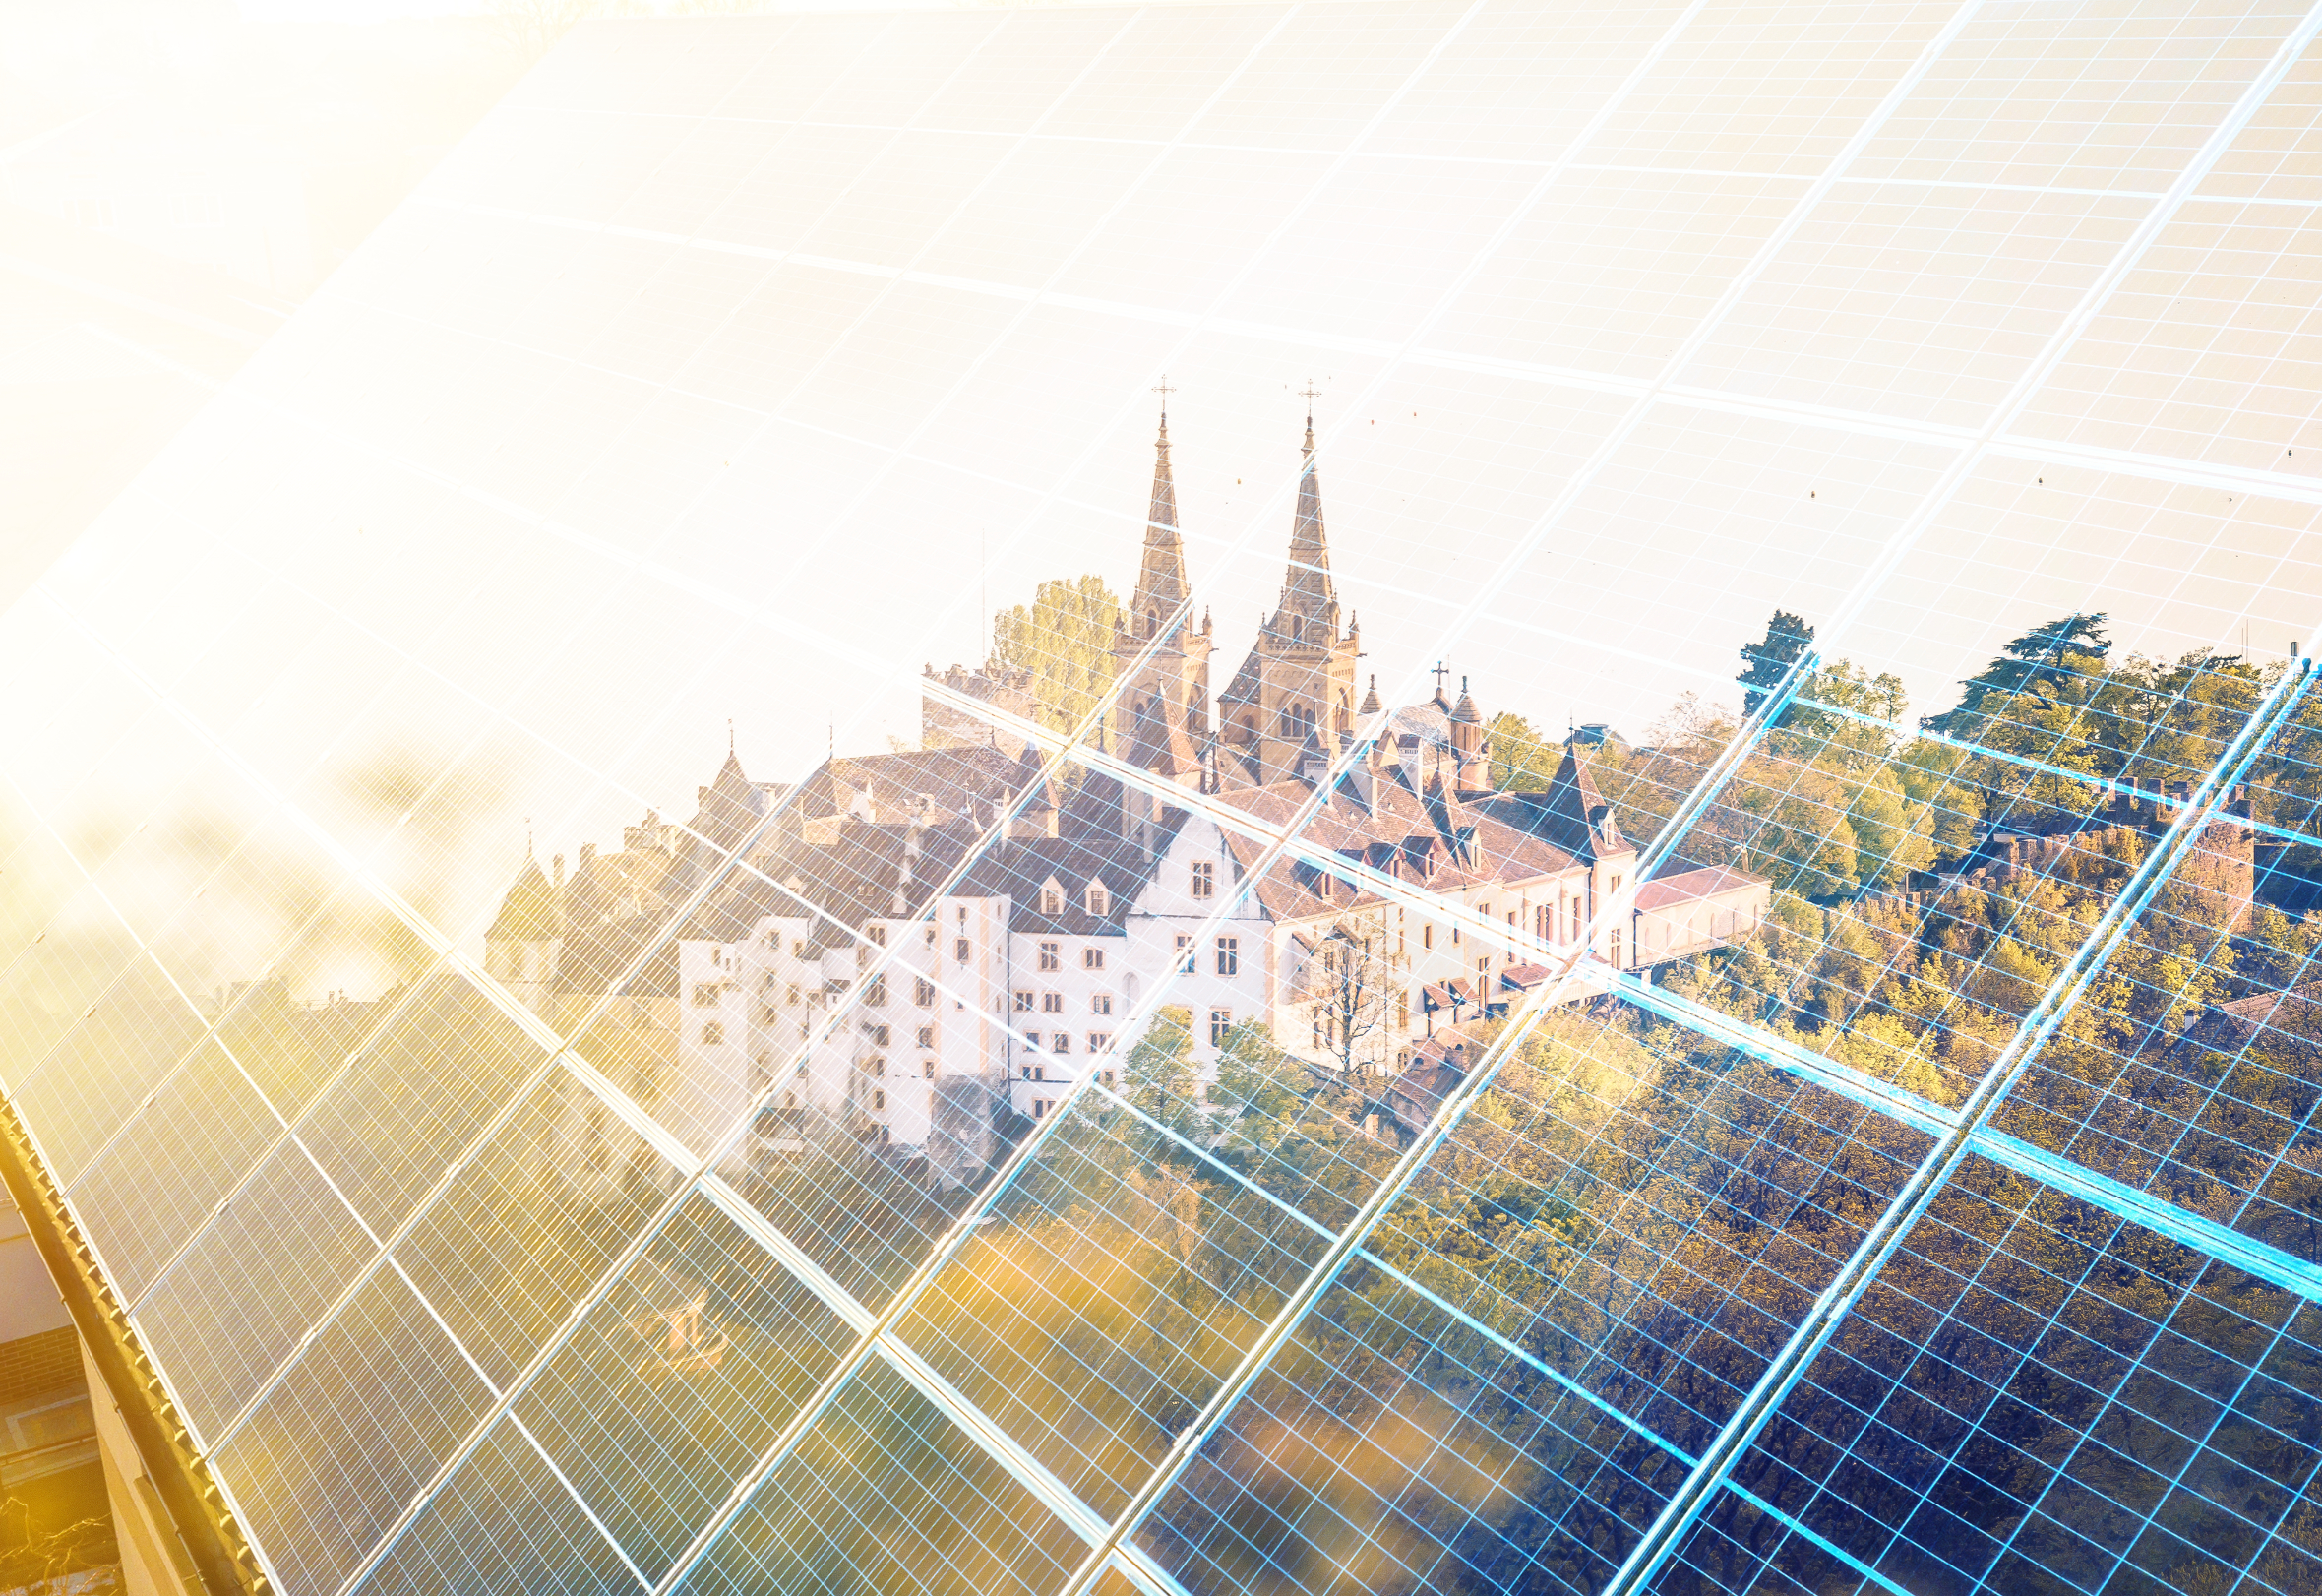 The various projects and collaborations underway in Neuchâtel exemplify its commitment to harnessing solar energy for a sustainable future.